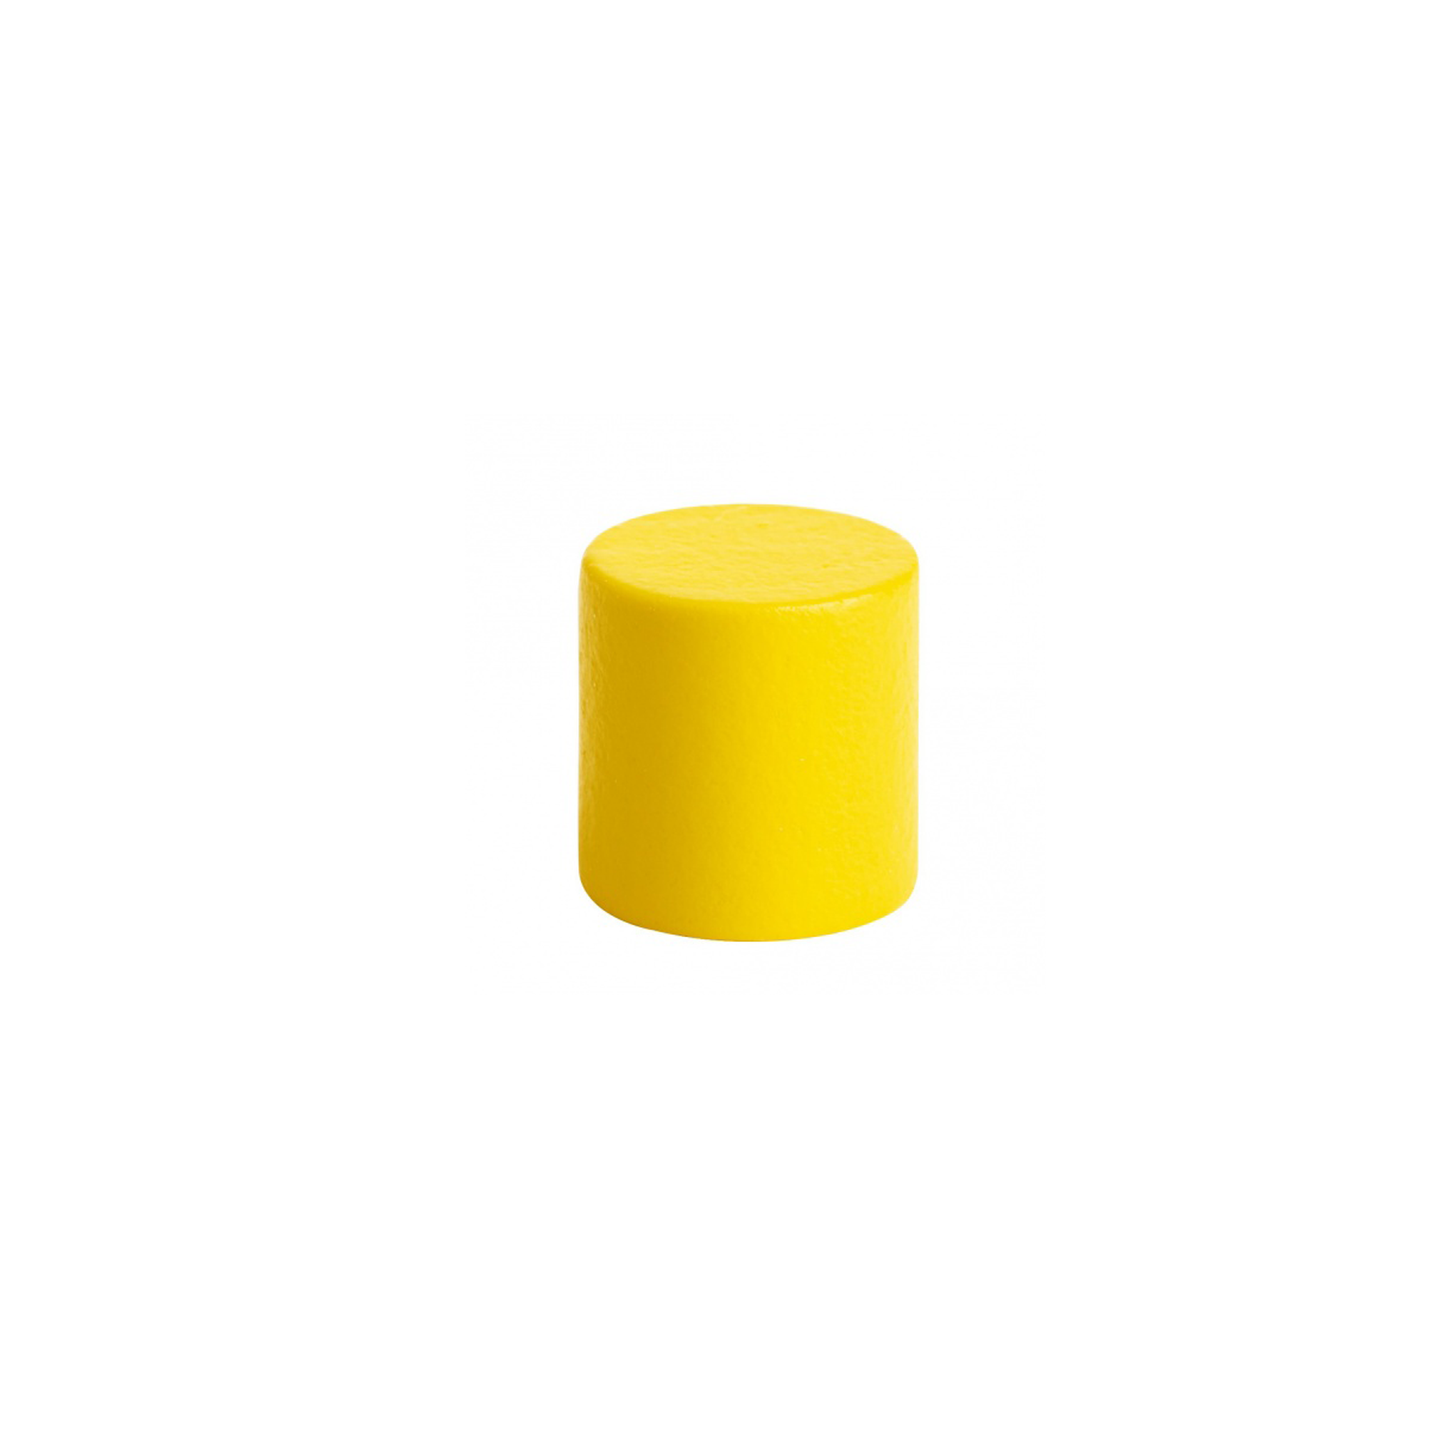 1st yellow cylinder - the smallest - GAM AMI